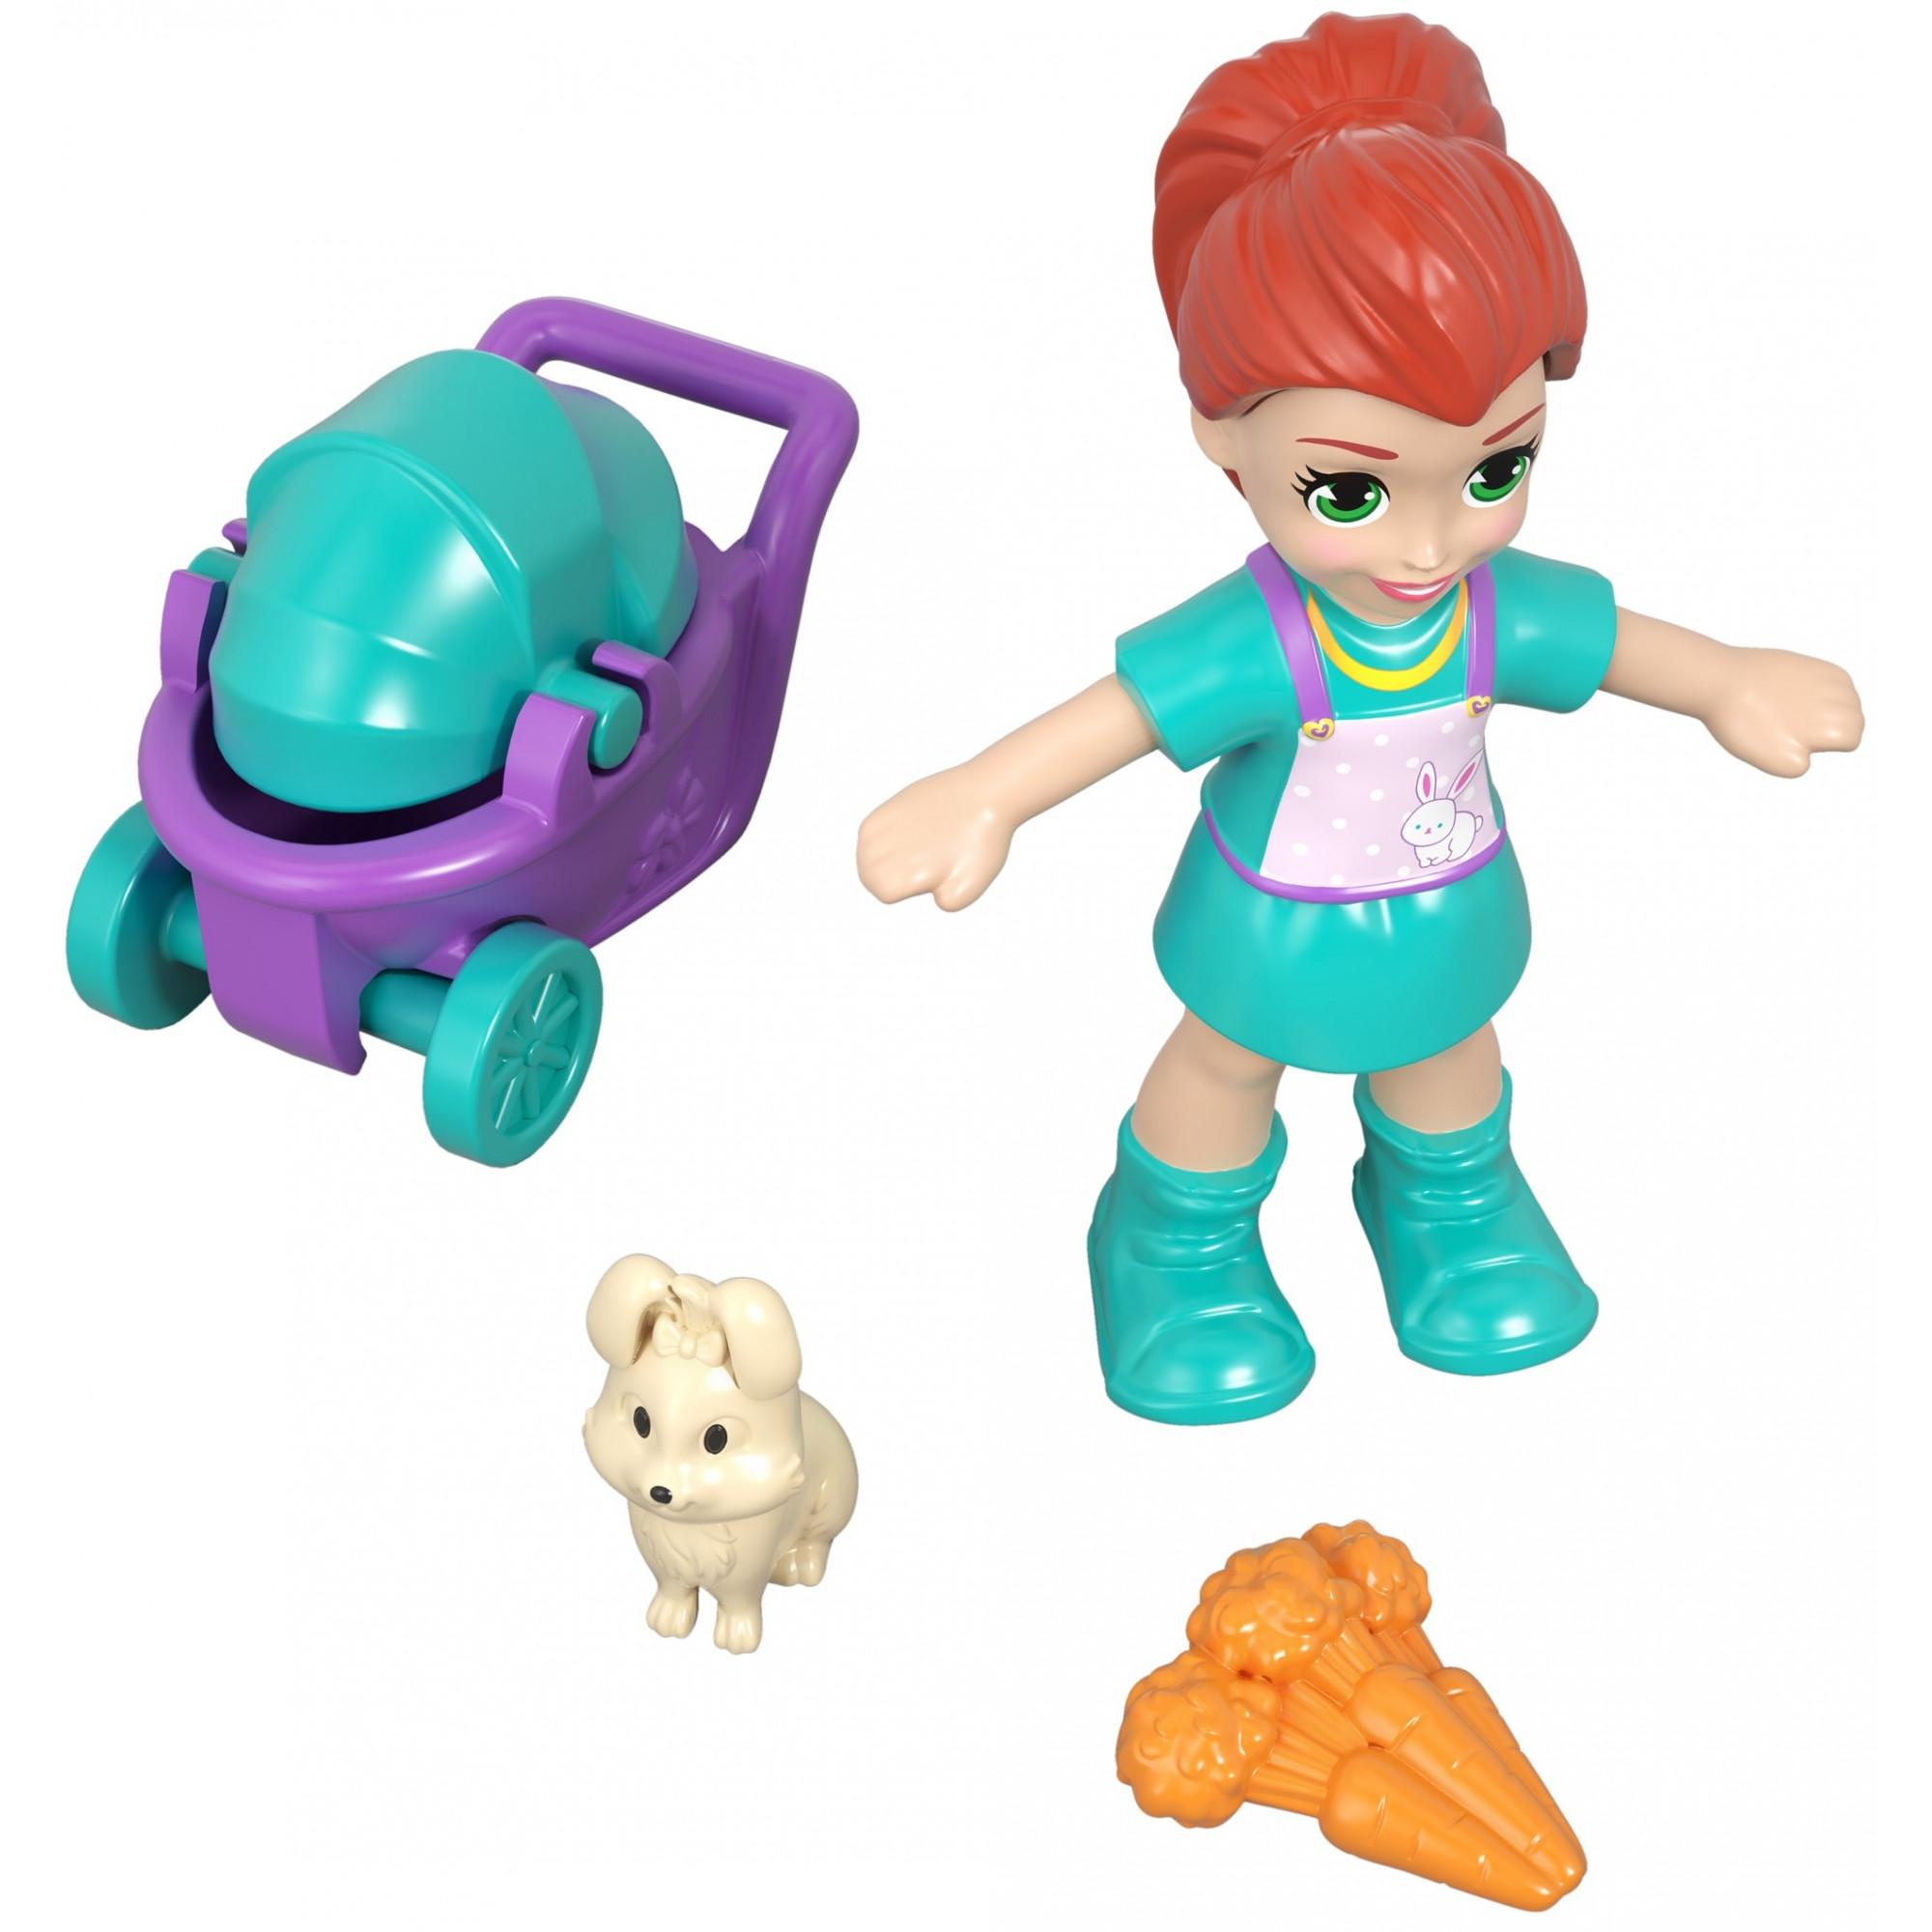 Polly Pocket Tiny Pocket Places Lila Pet Compact with Doll - image 5 of 7